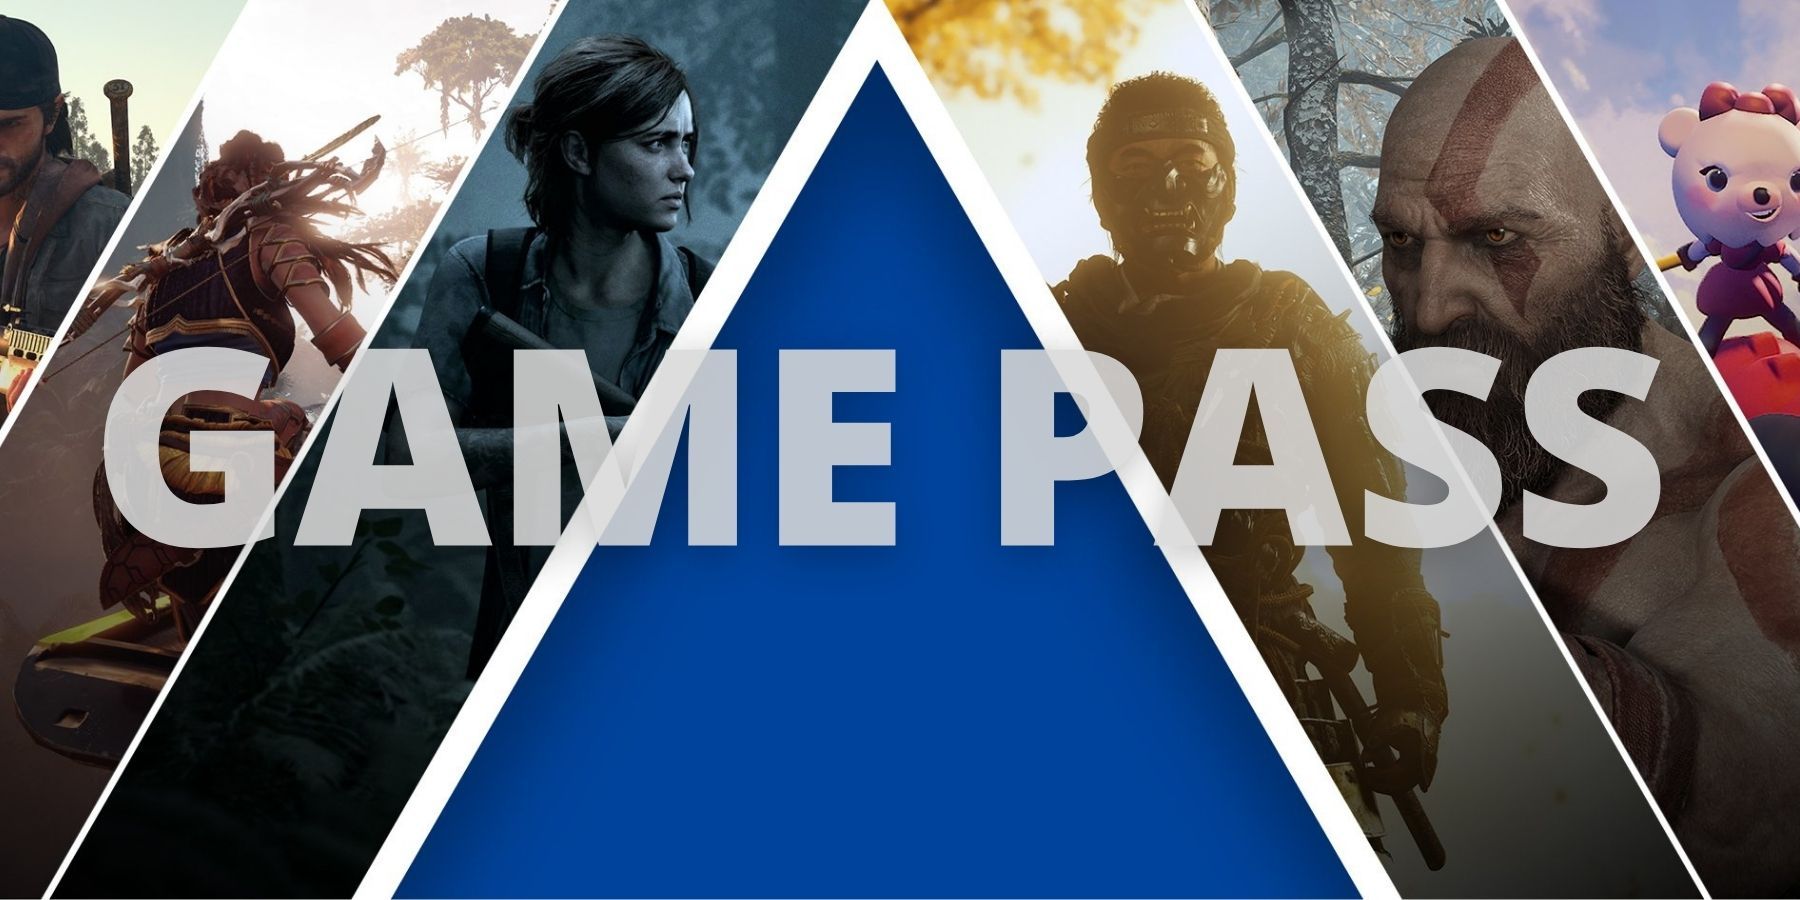 Sony Game Pass